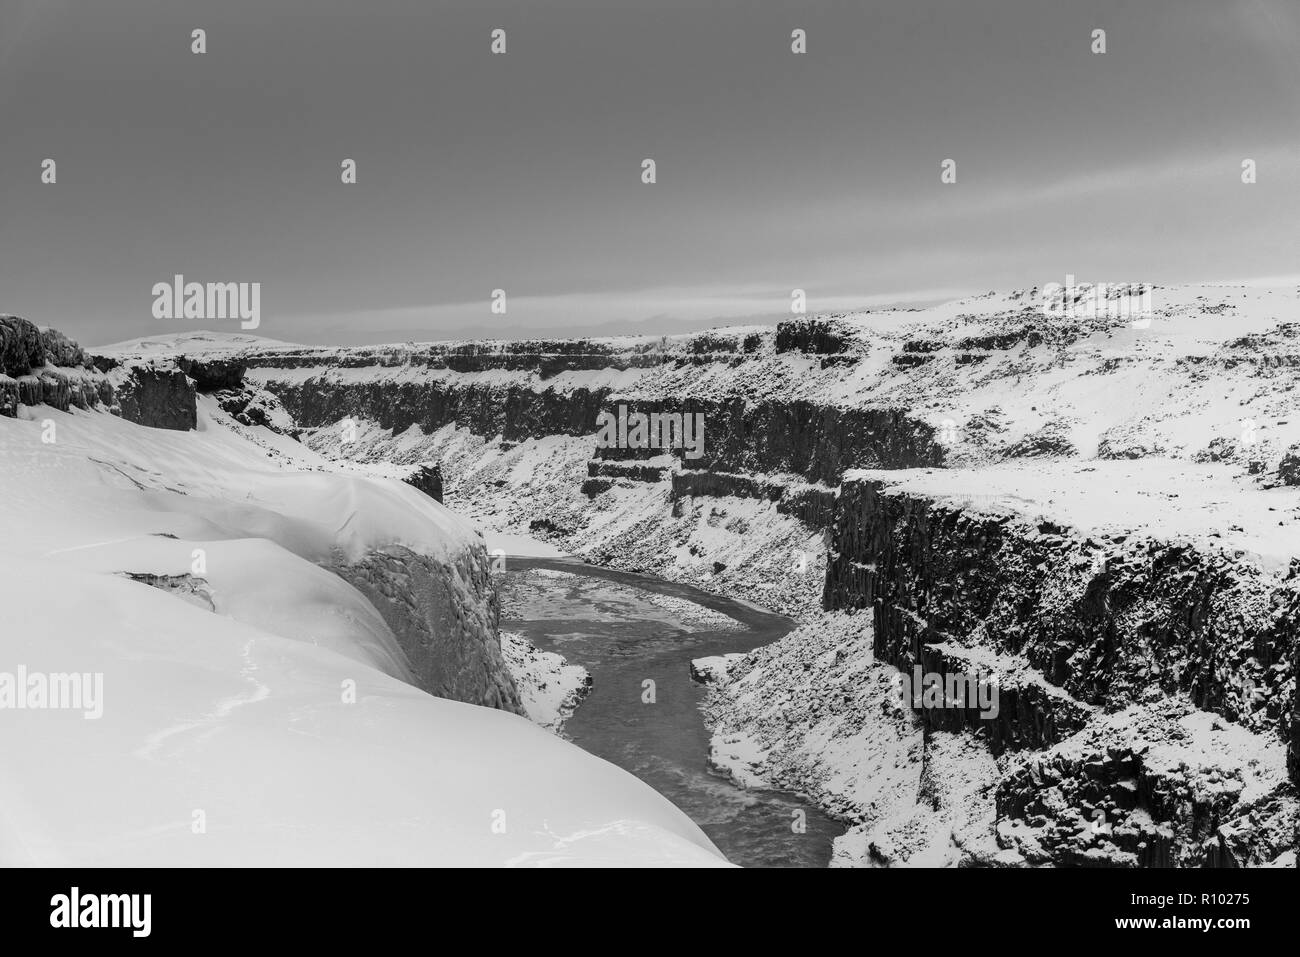 Amazing Iceland in winter - breathtaking scenery and frozen landscapes - incredible black and white images from iconic locations Stock Photo